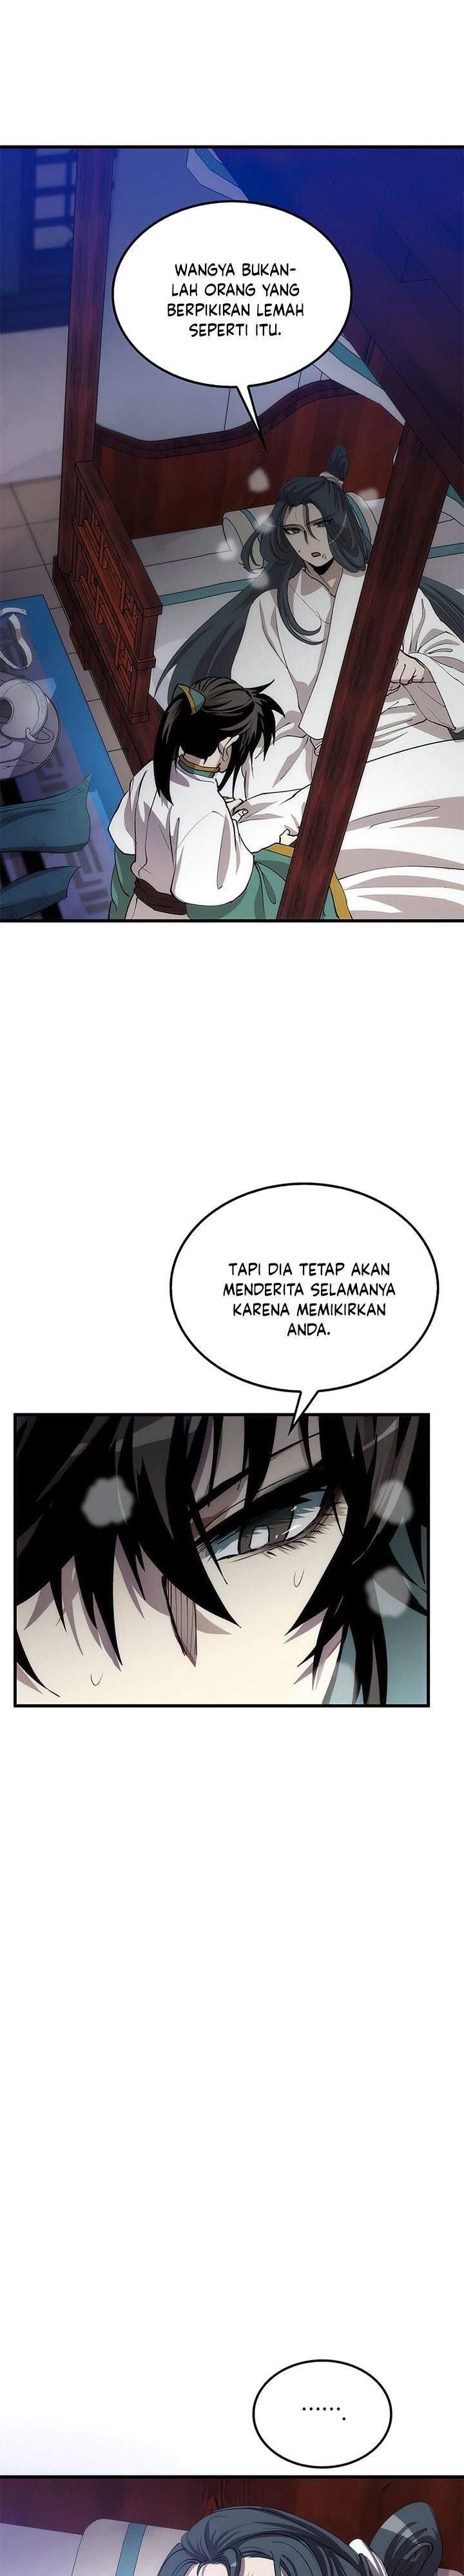 Doctor’s Rebirth Chapter 51